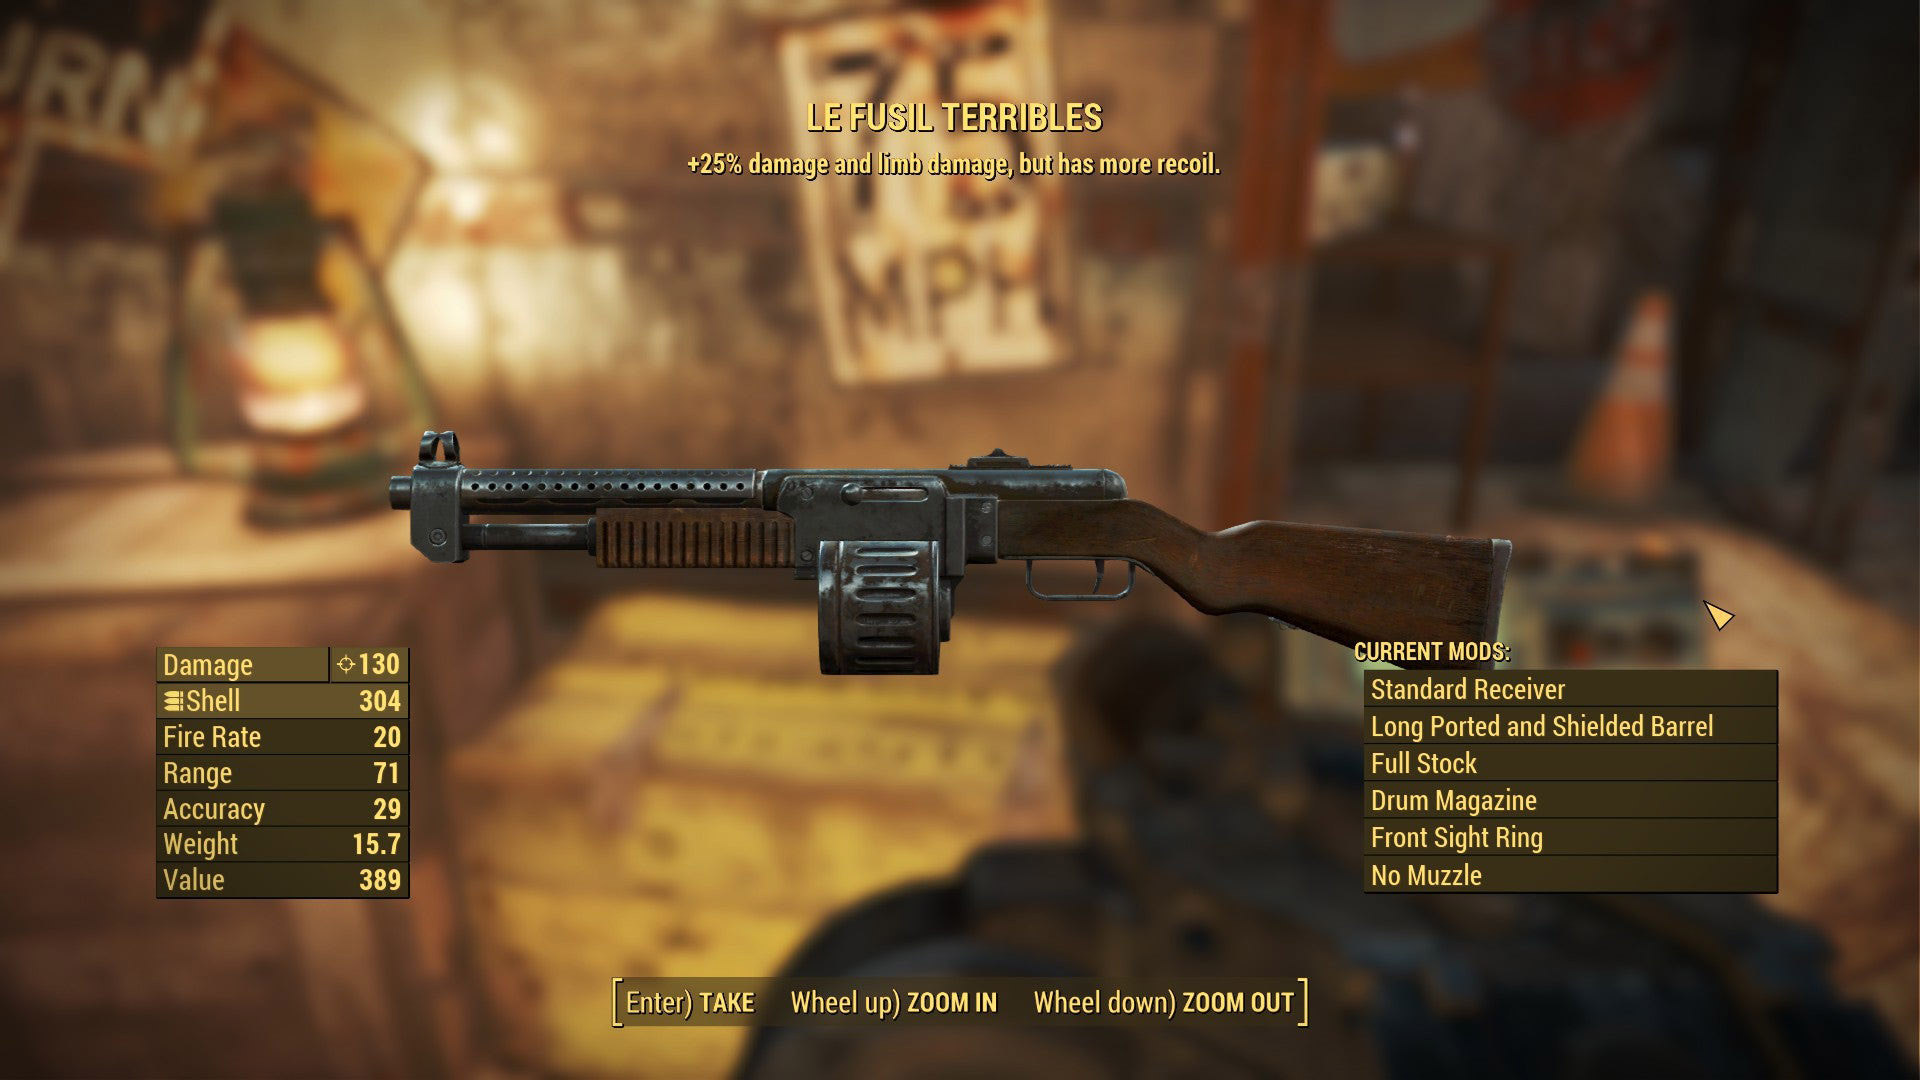 All legendary weapon fallout 4 фото 89